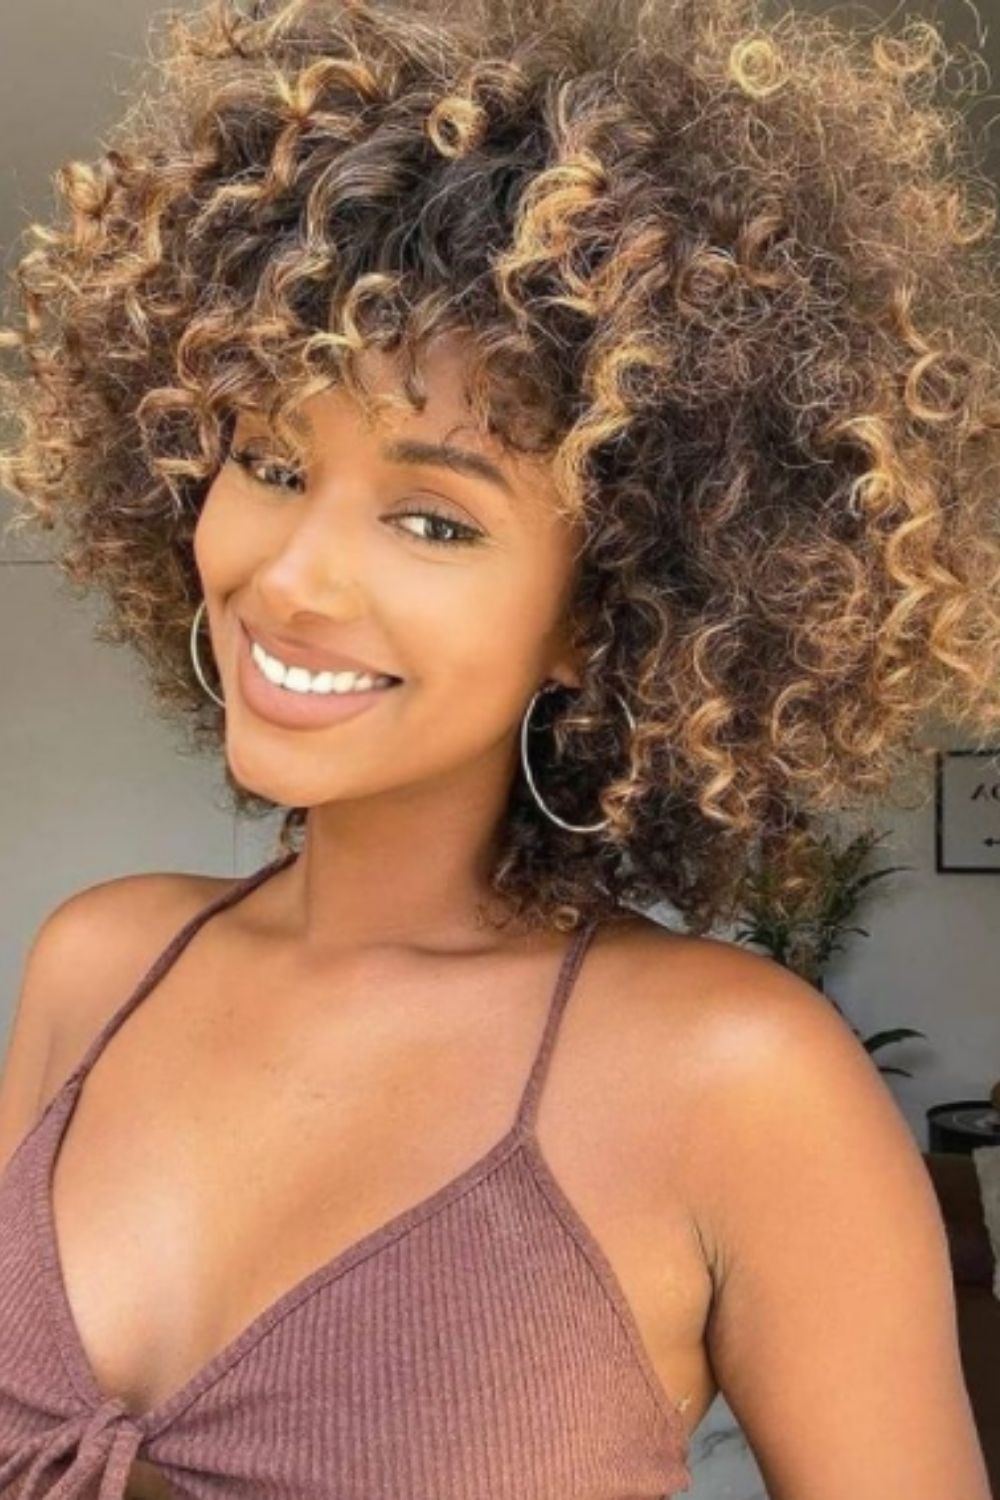 What Is The Best Haircut For Short Curly Hairstyle?